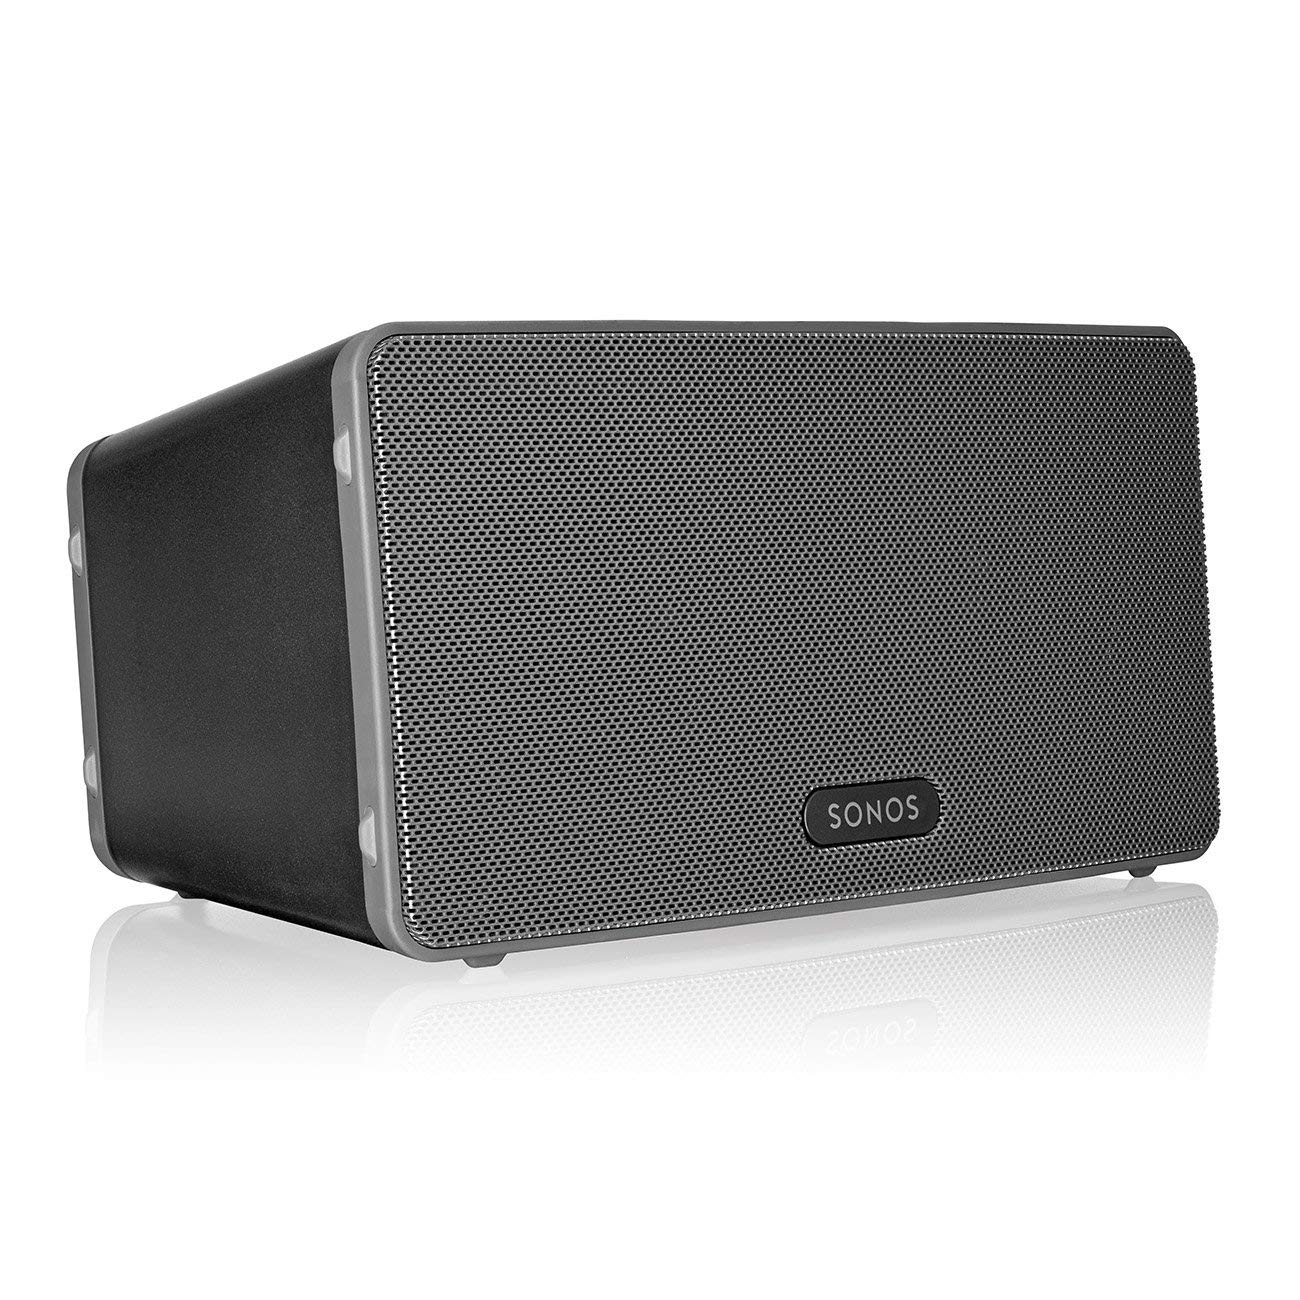 Sonos Play:3 – Mid-Sized Wireless Smart Home Speaker for Streaming Music, Amazon certified and works with Alexa. (Black)